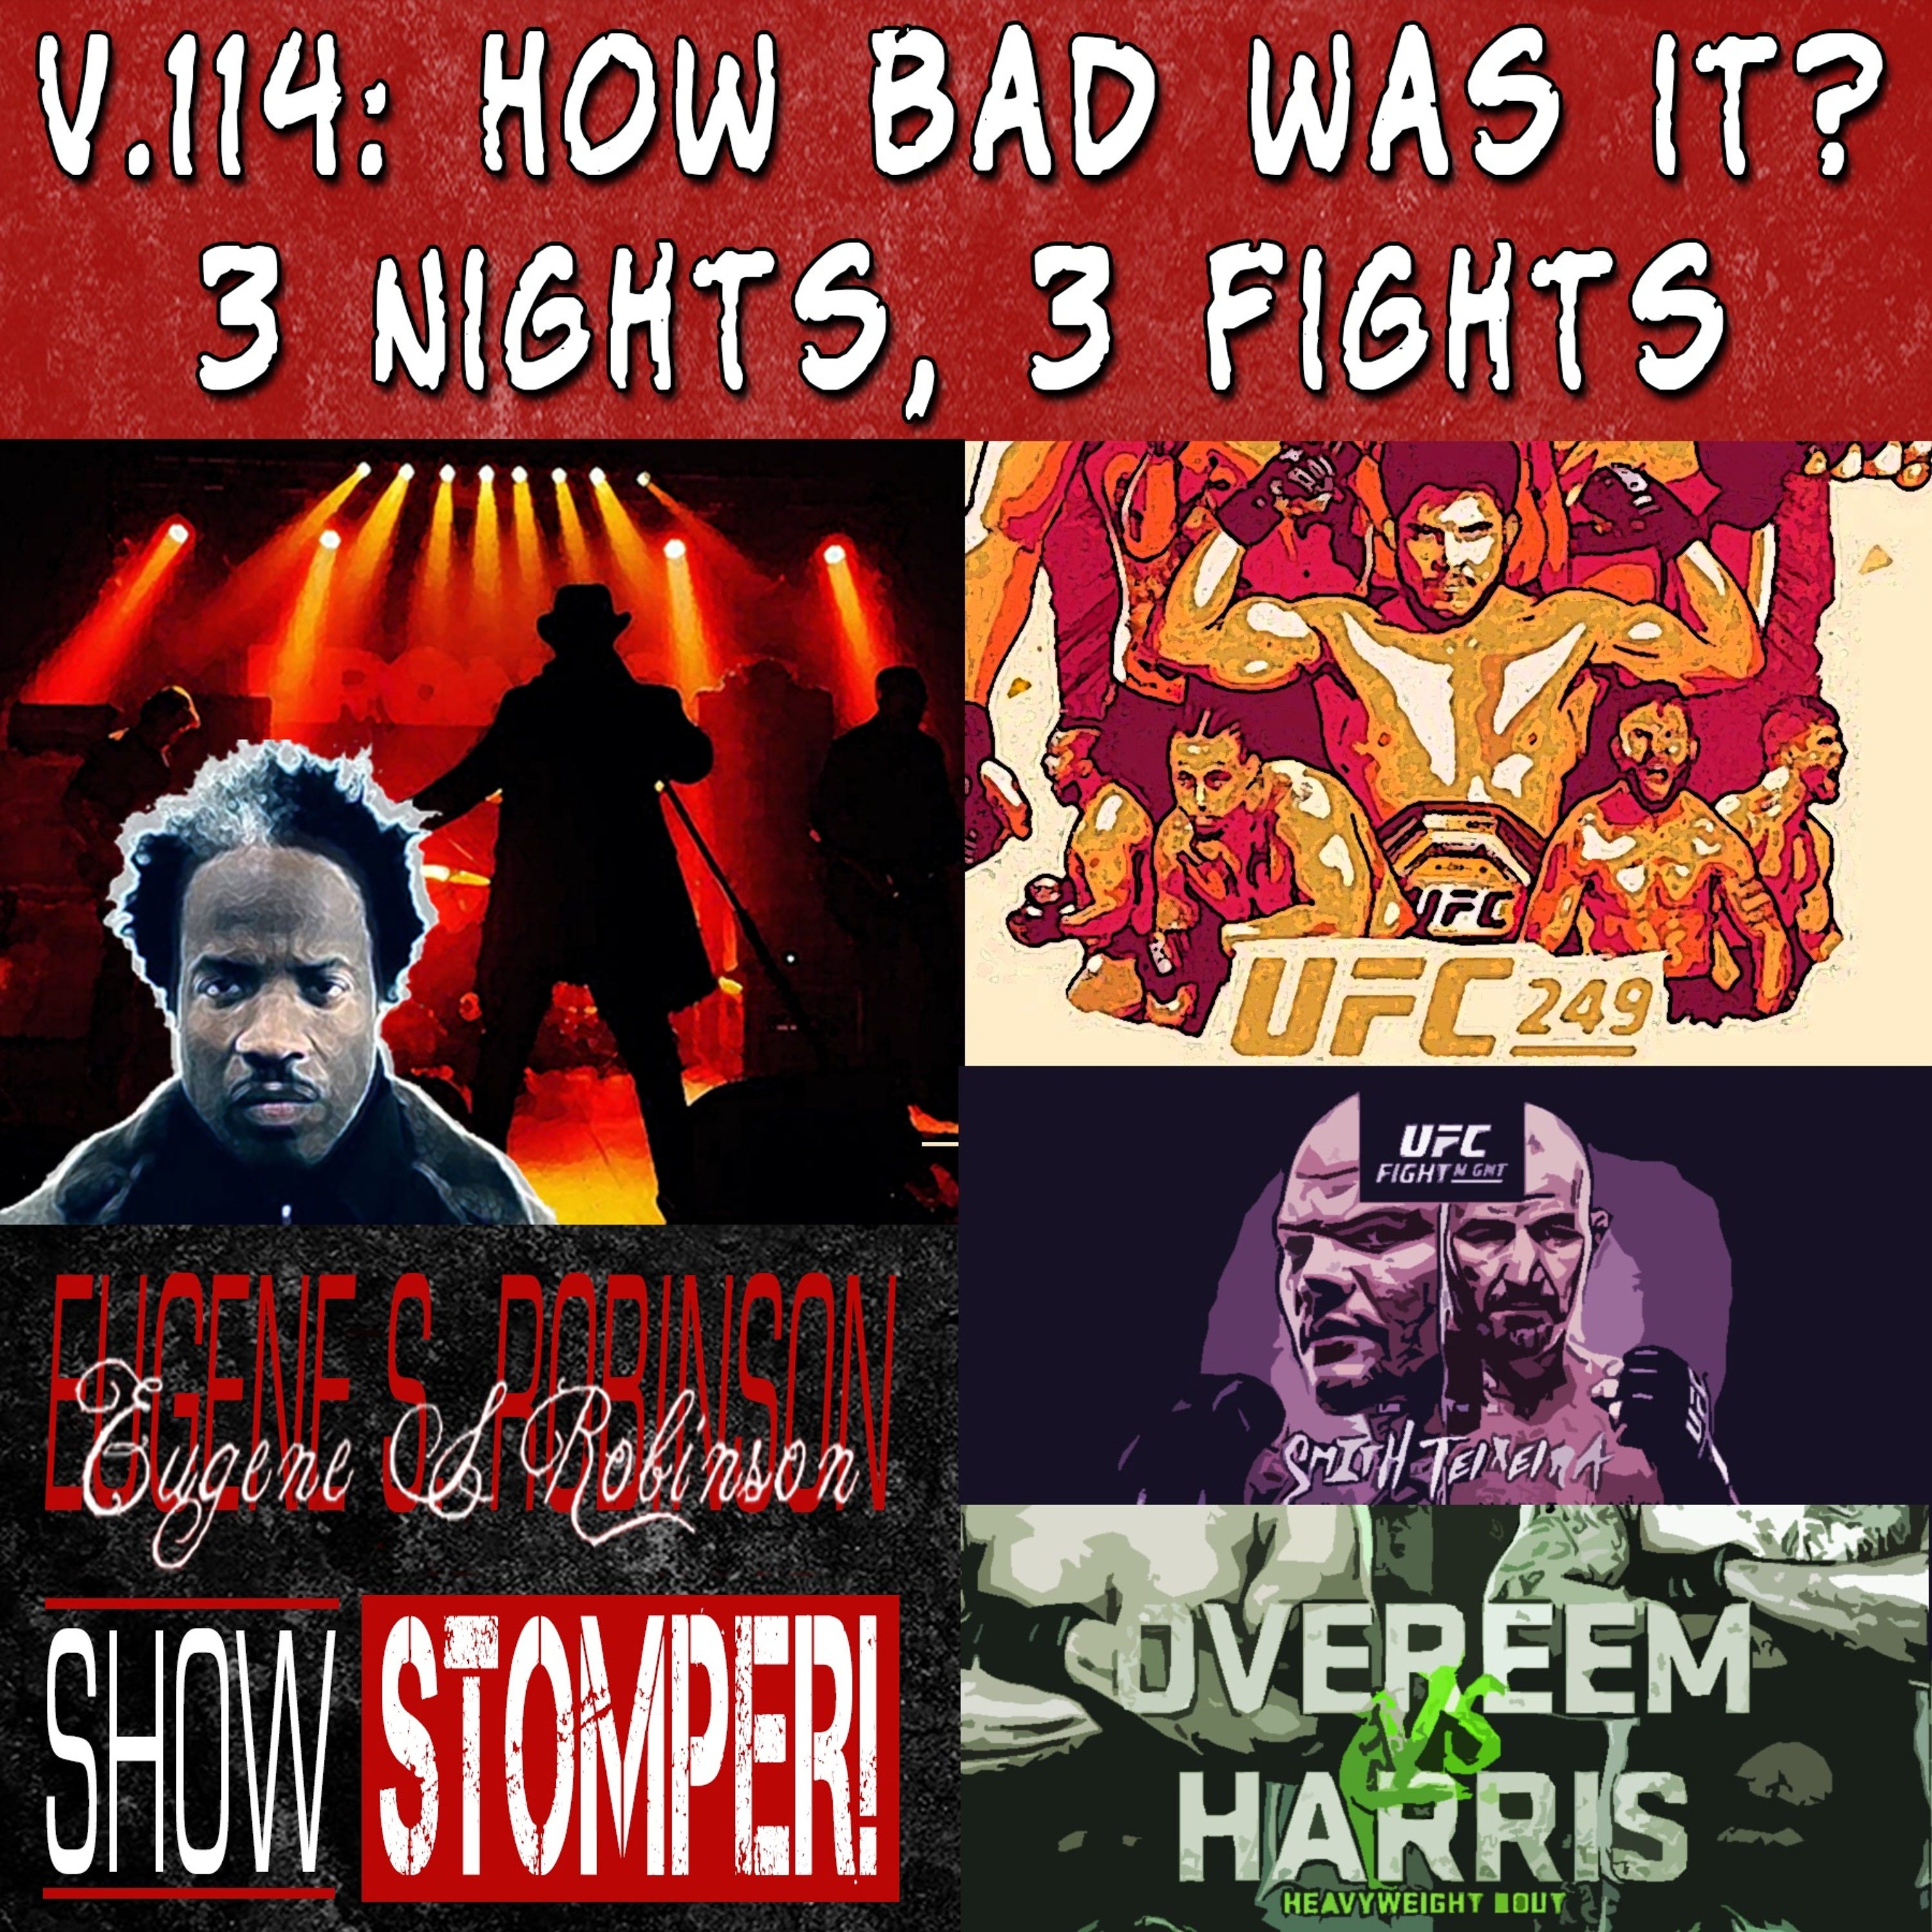 V.114 - How Bad Was It? 3 Nights, 3 Fights - A Recap on The Eugene S. Robinson Show Stomper!